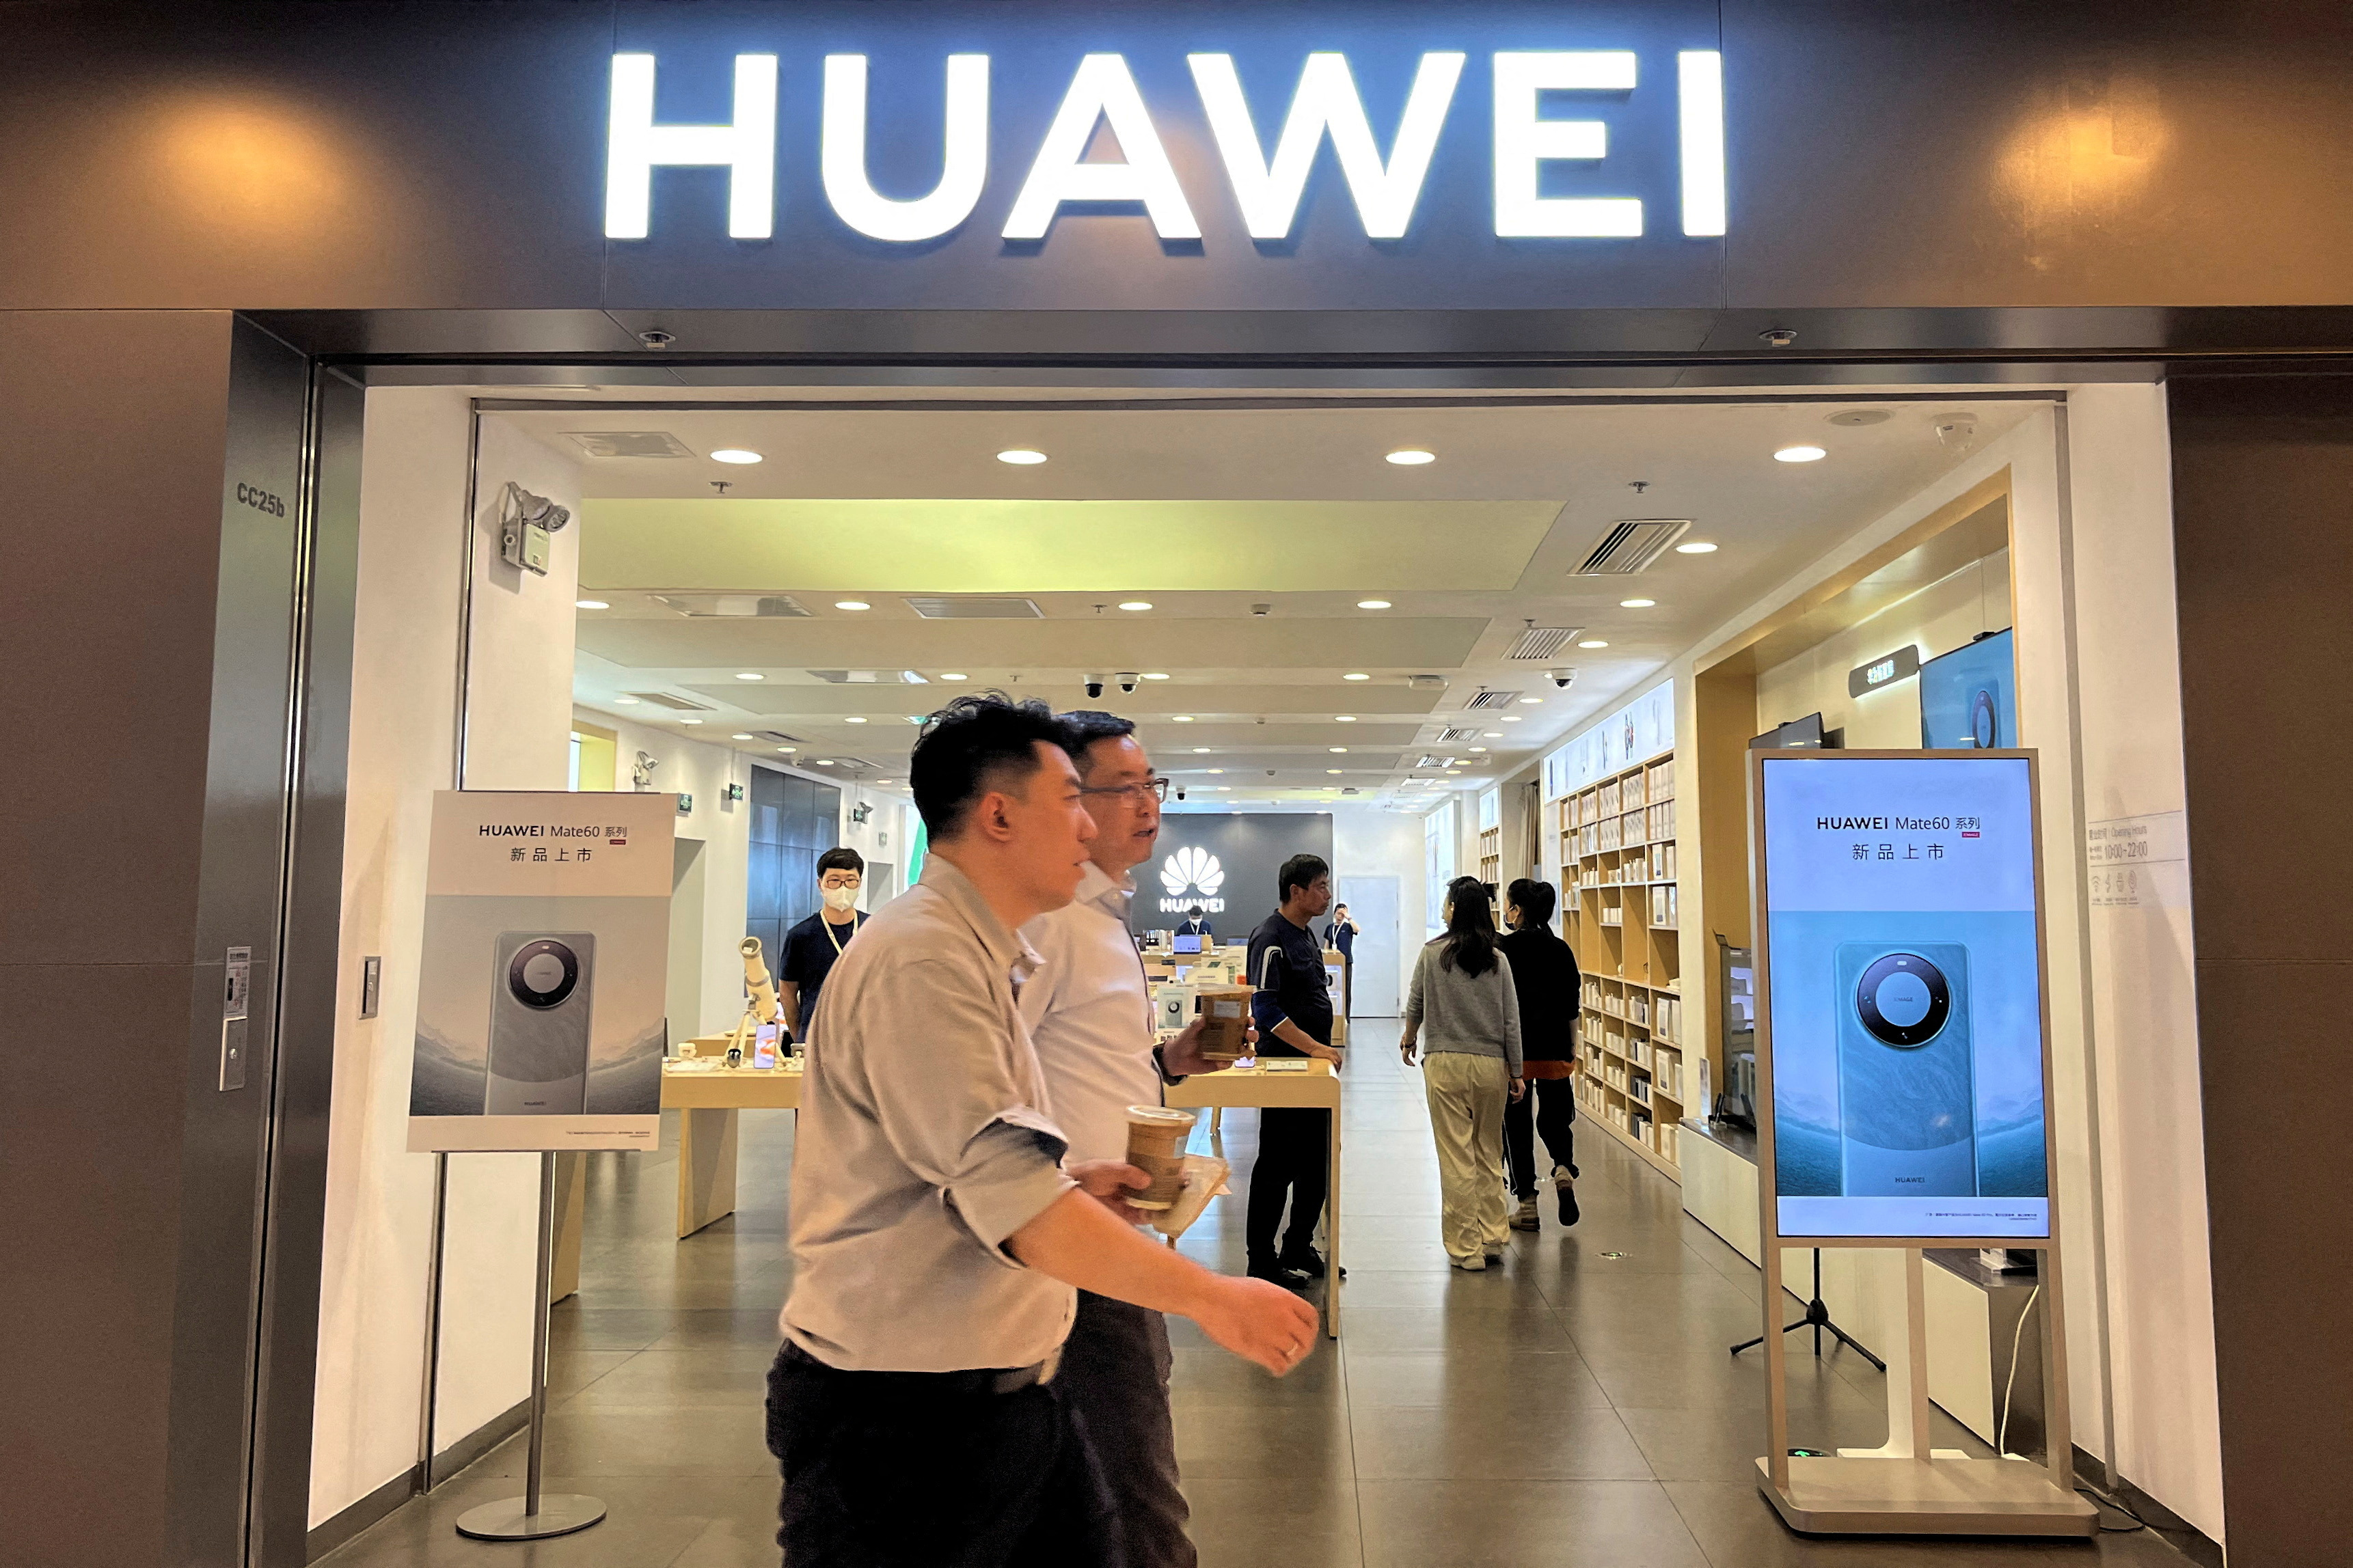 US lawmaker calls for ending Huawei, SMIC exports after chip breakthrough